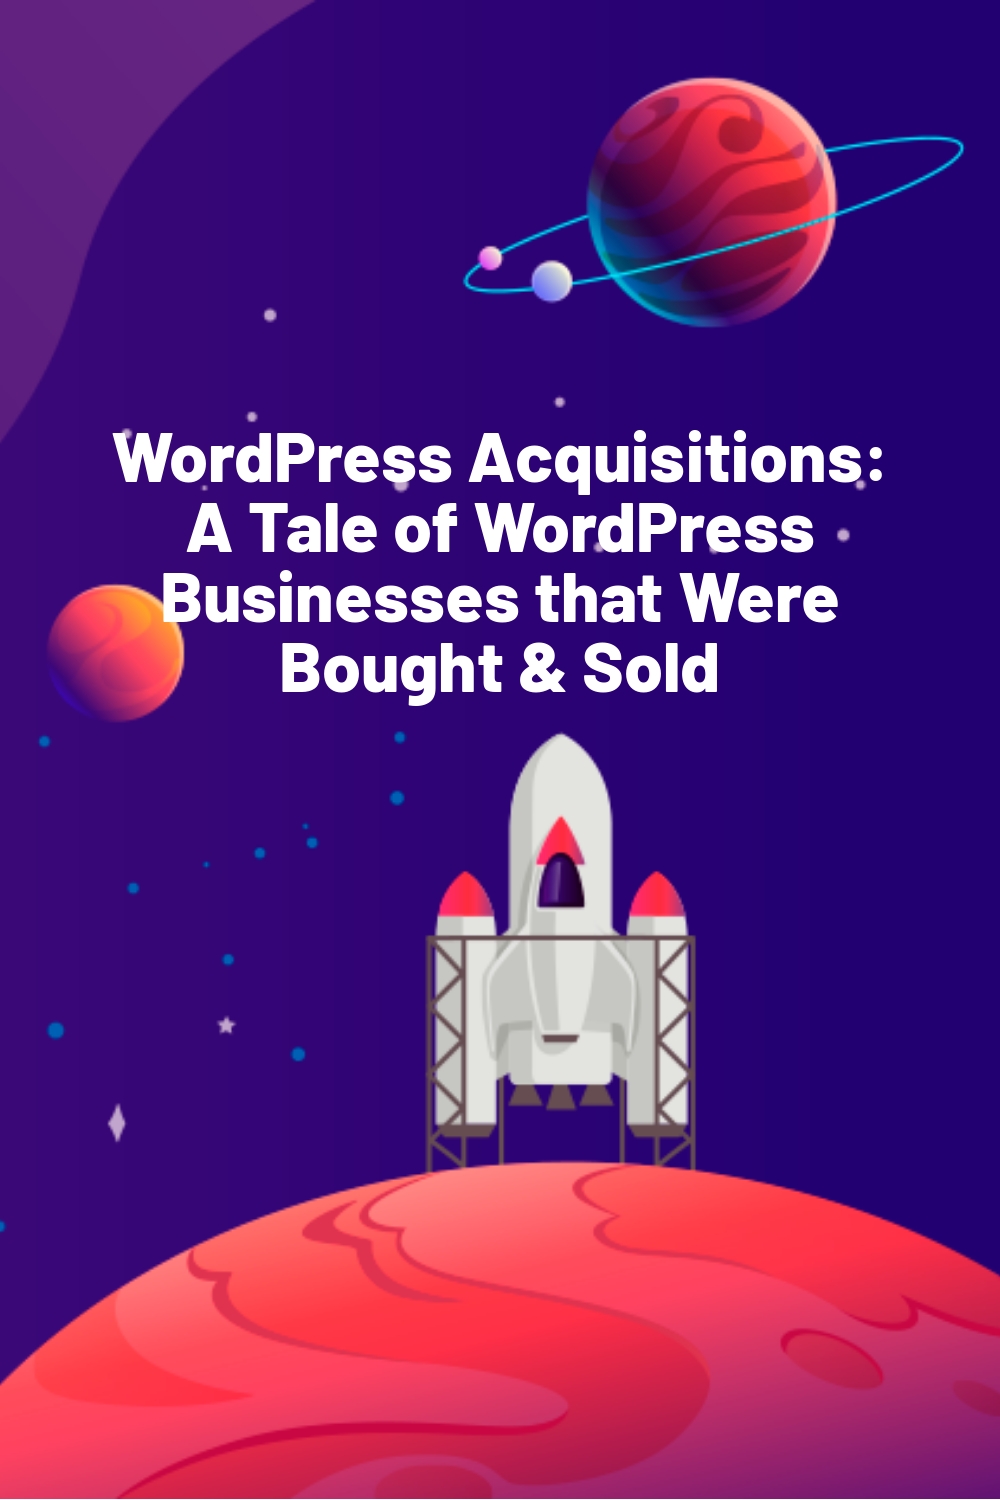 WordPress Acquisitions: A Tale of WordPress Businesses that Were Bought & Sold